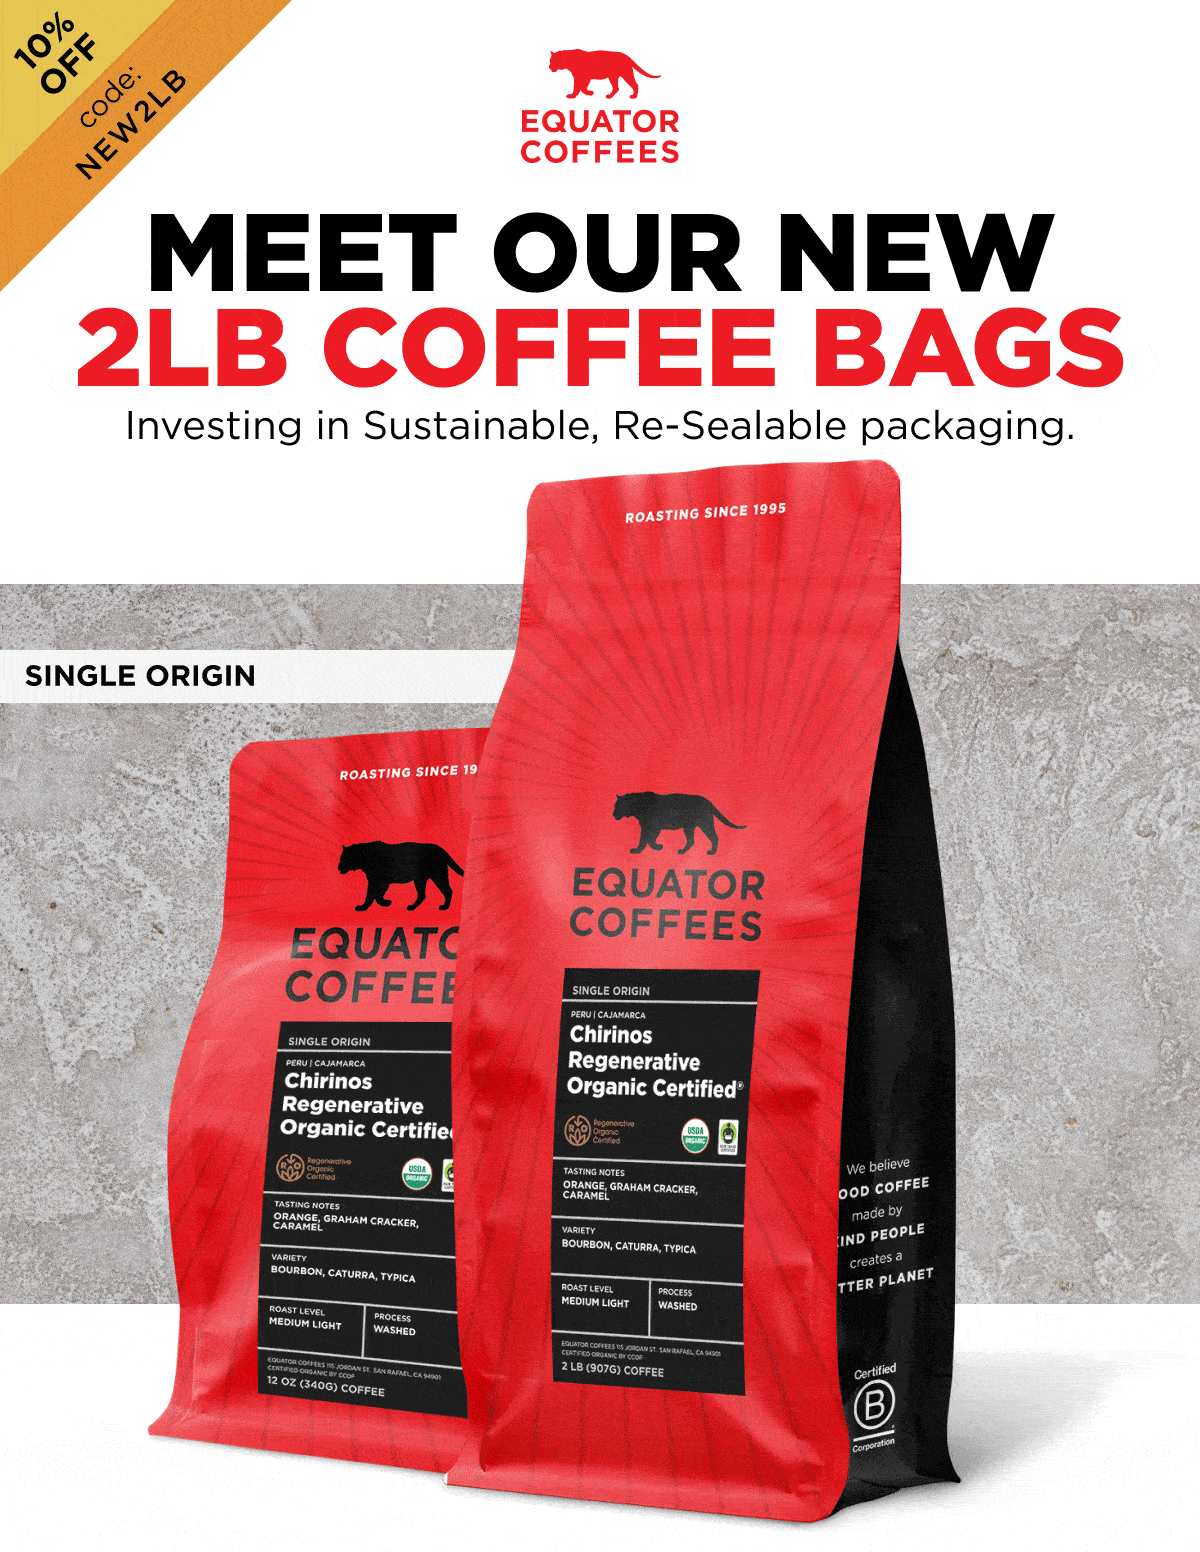 New Look. Same Equator. Proud to welcome our new 12oz coffee bags.